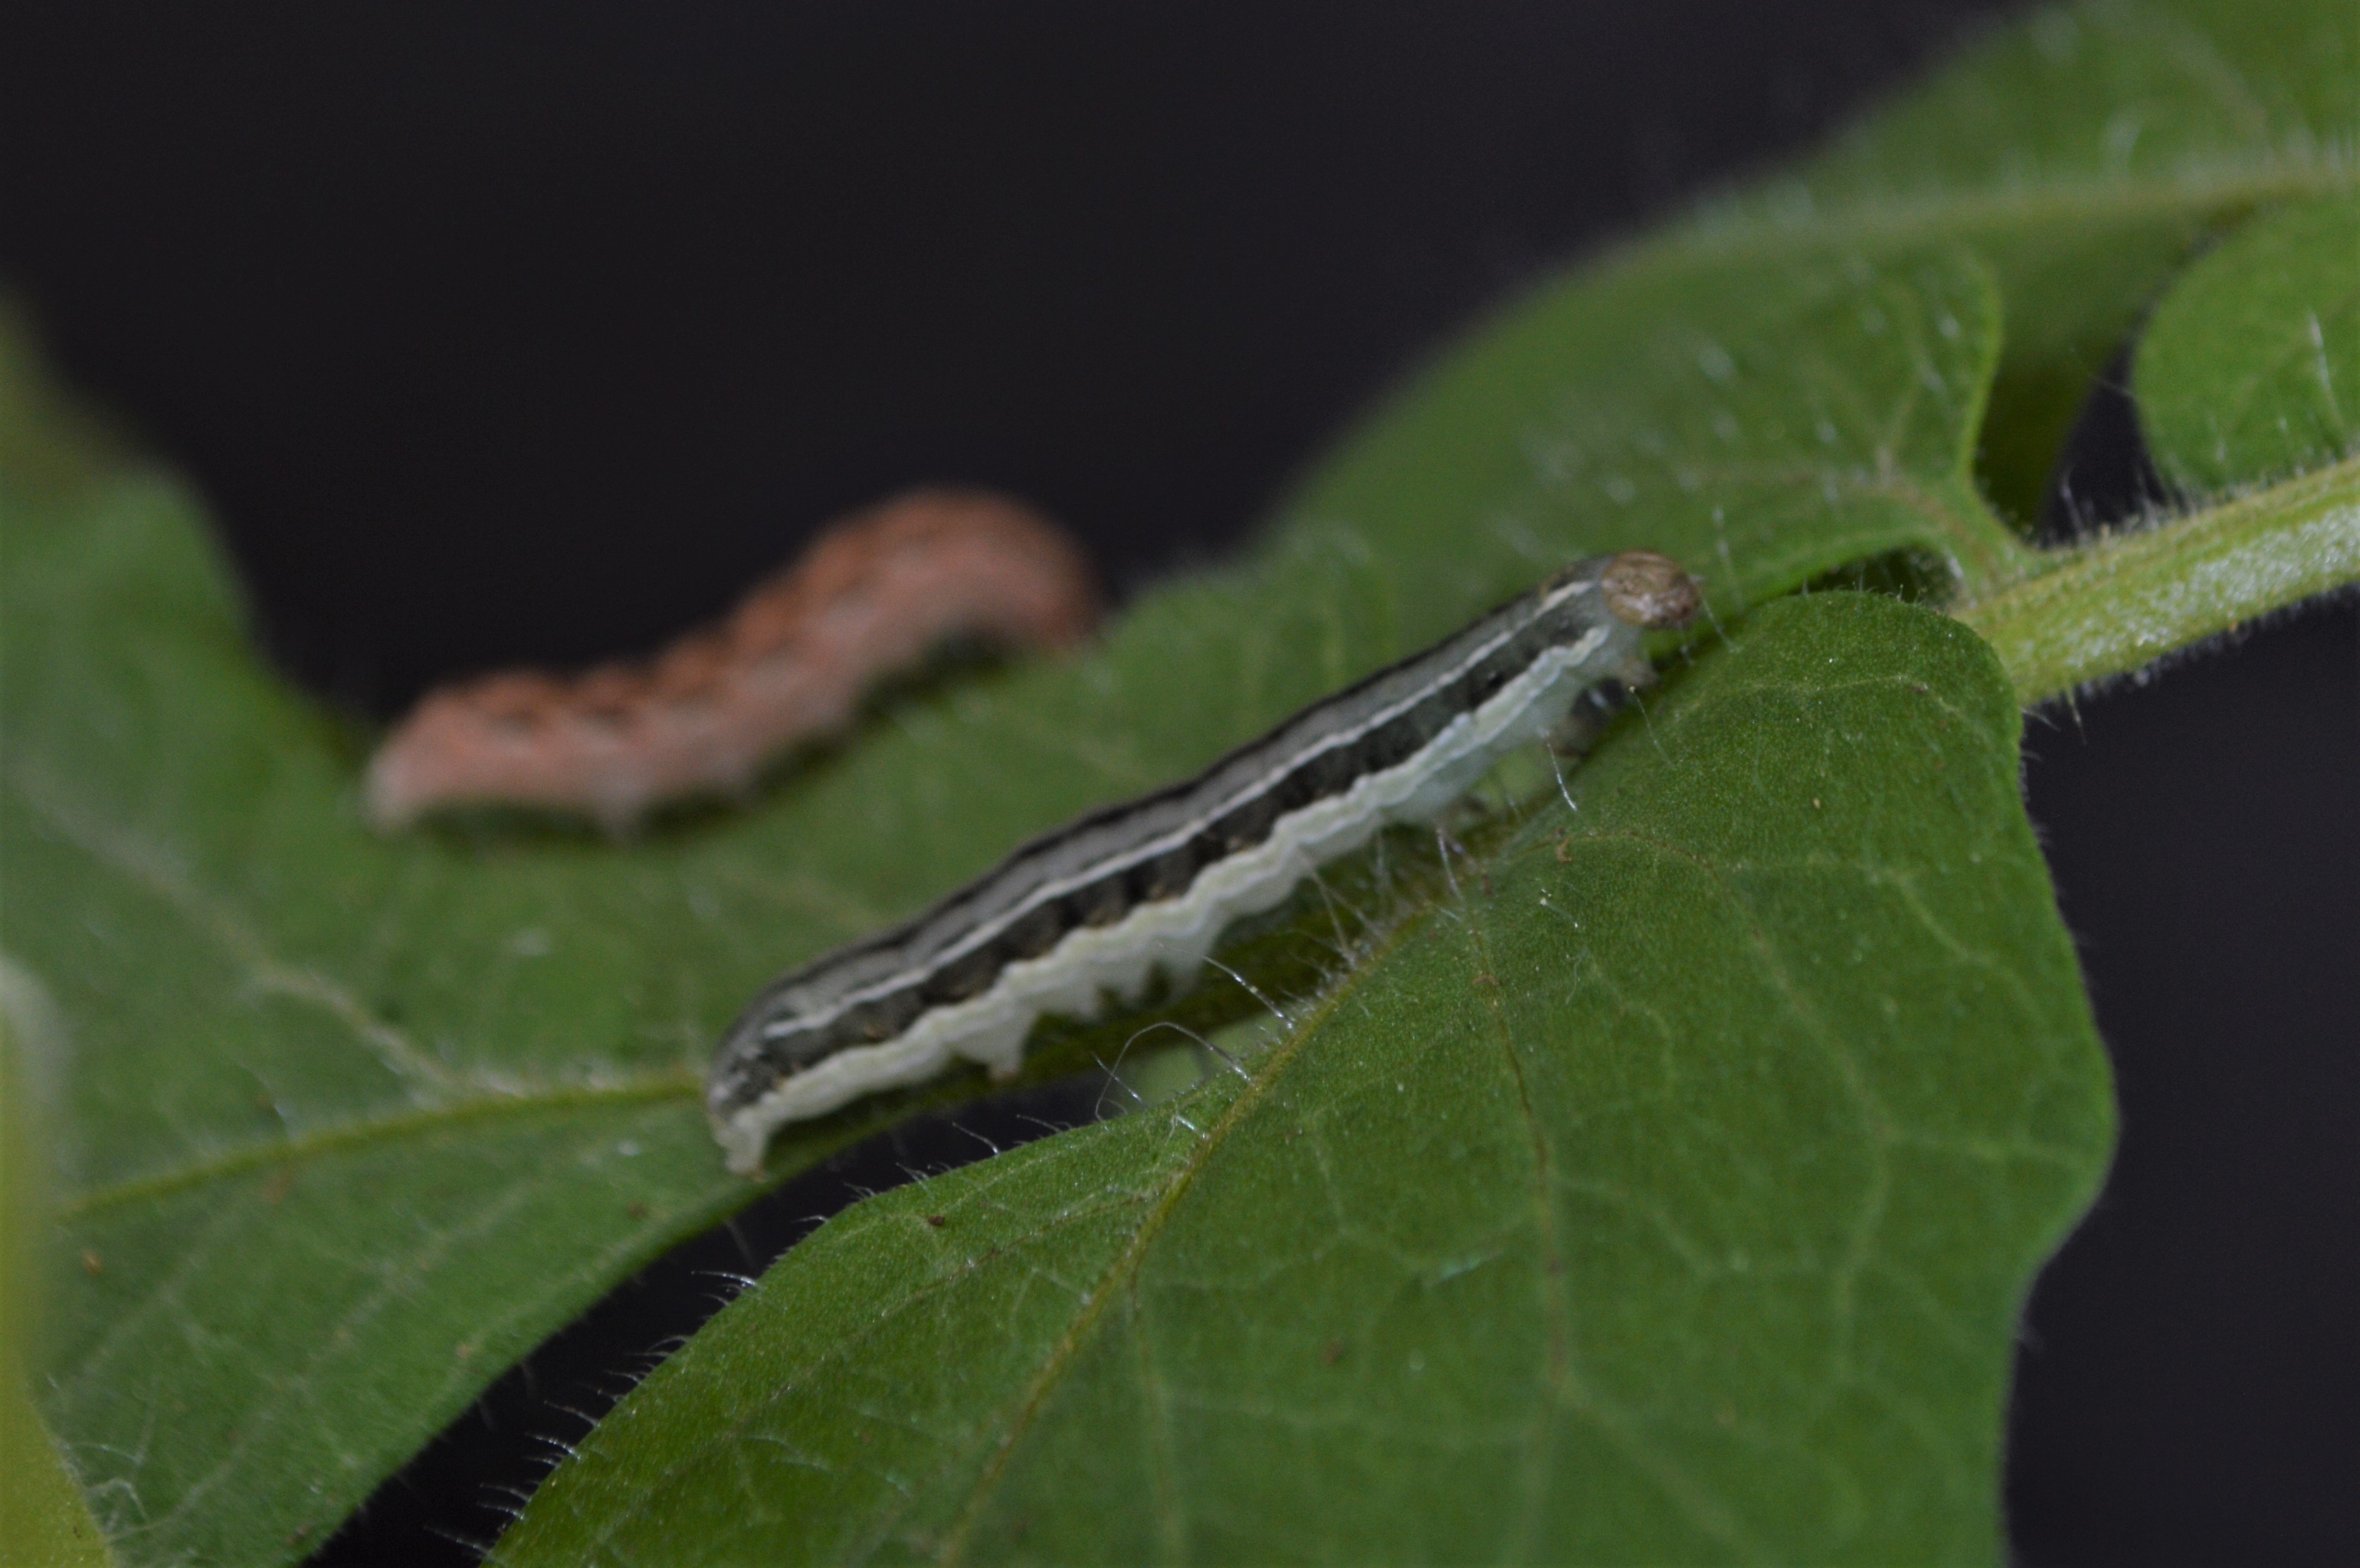 Plants under attack can turn hungry caterpillars into cannibals